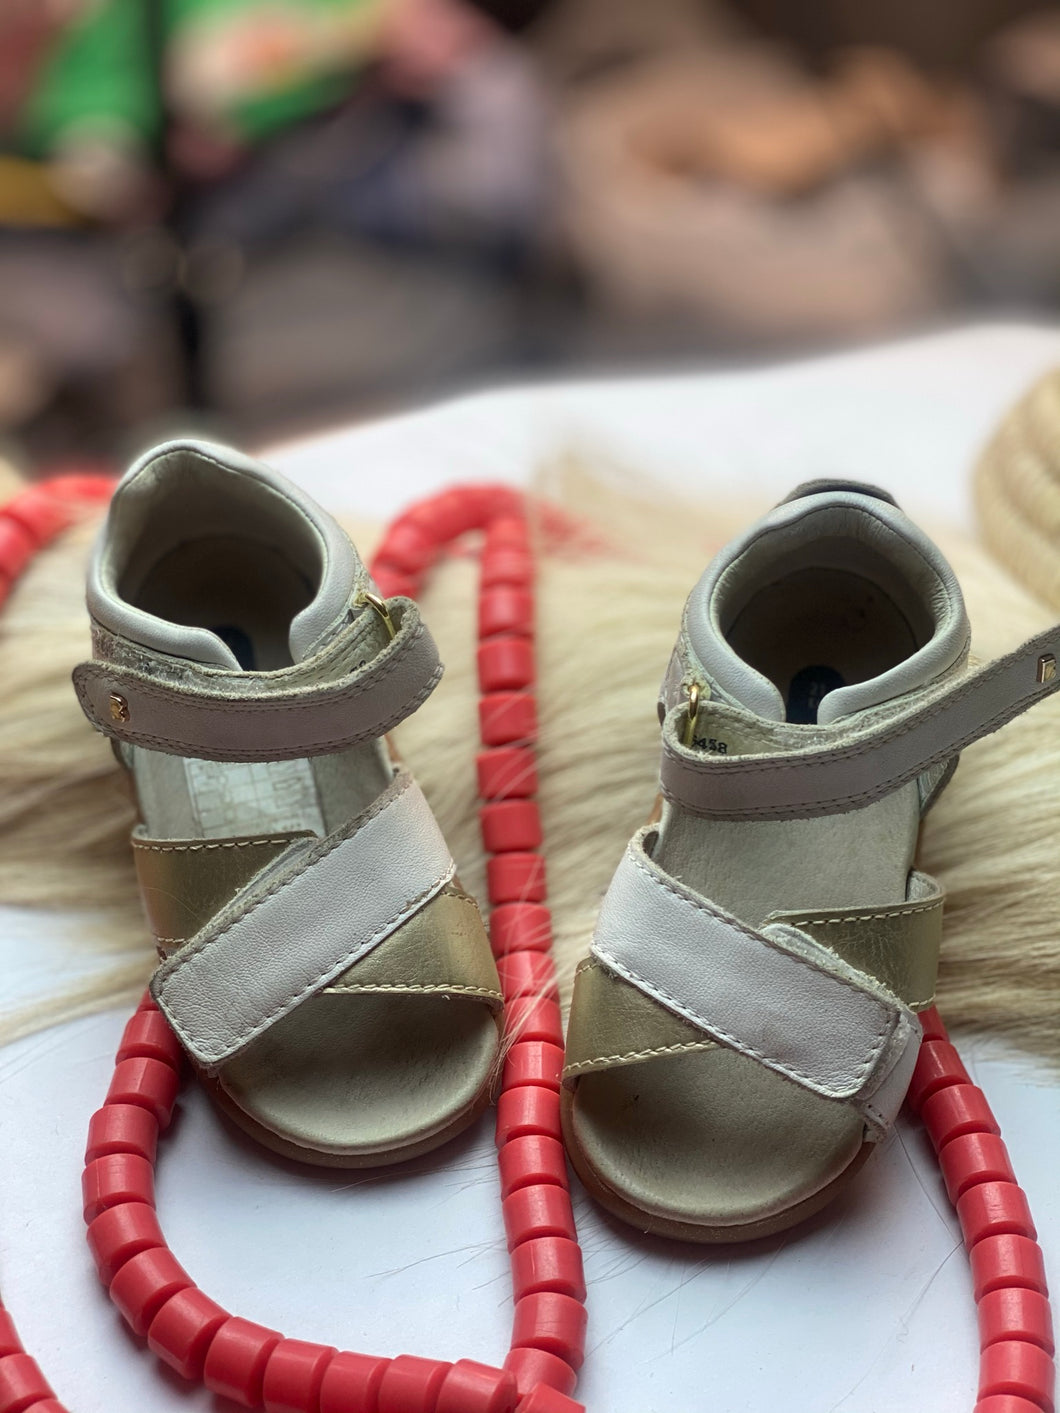 Leather Cream and Gold shoes - Toddler Girl's size 21 (EU)